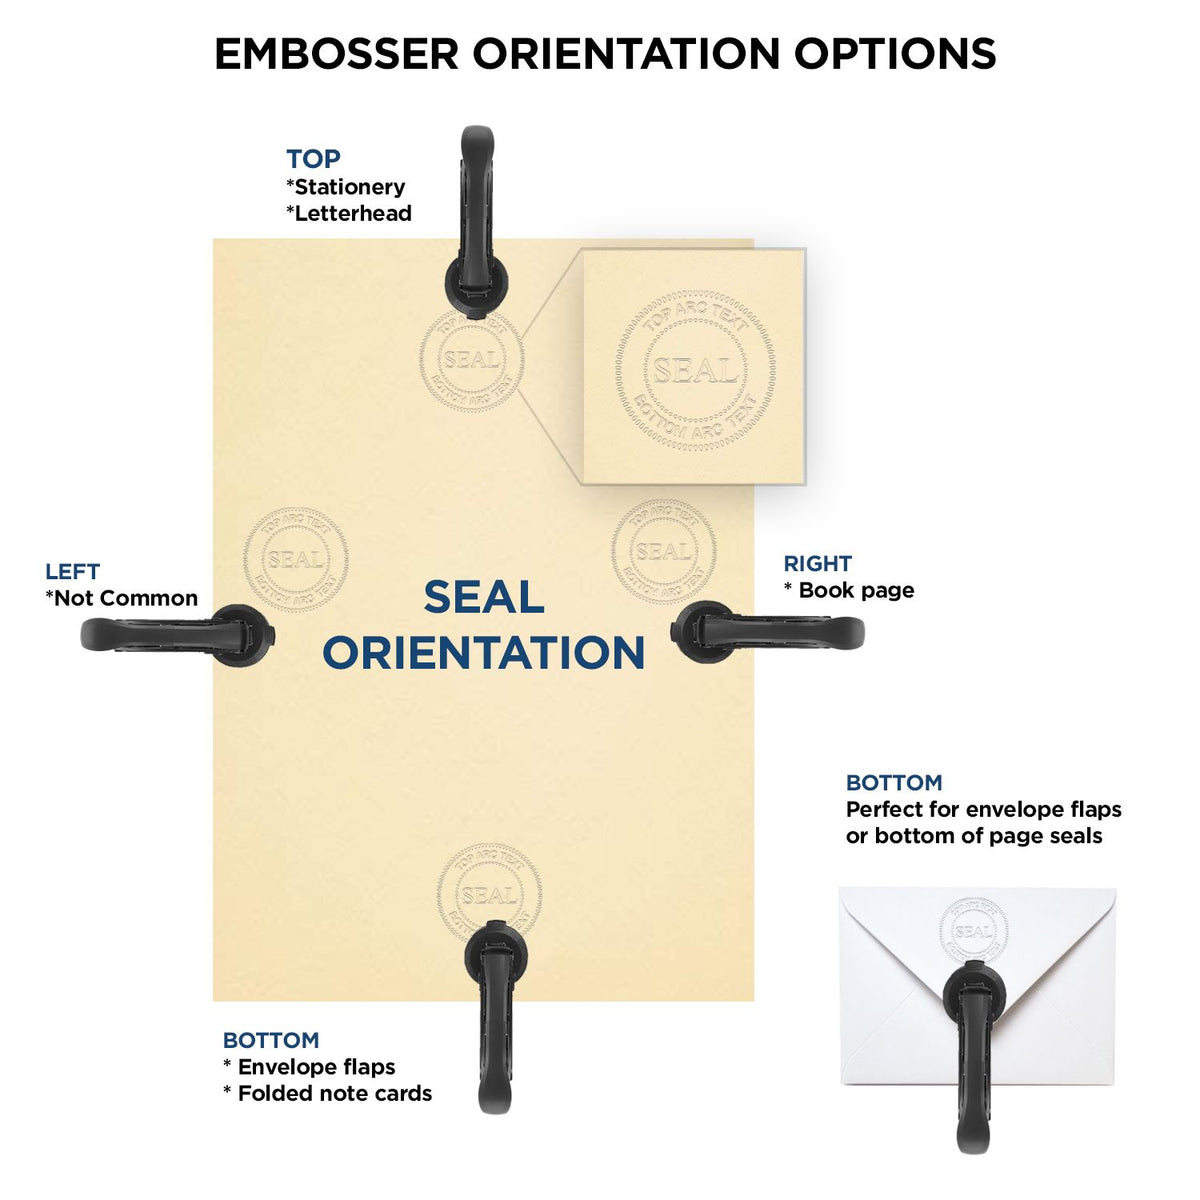 An infographic for the Ohio Engineer Desk Seal showing embosser orientation, this is showing examples of a top, bottom, right and left insert.